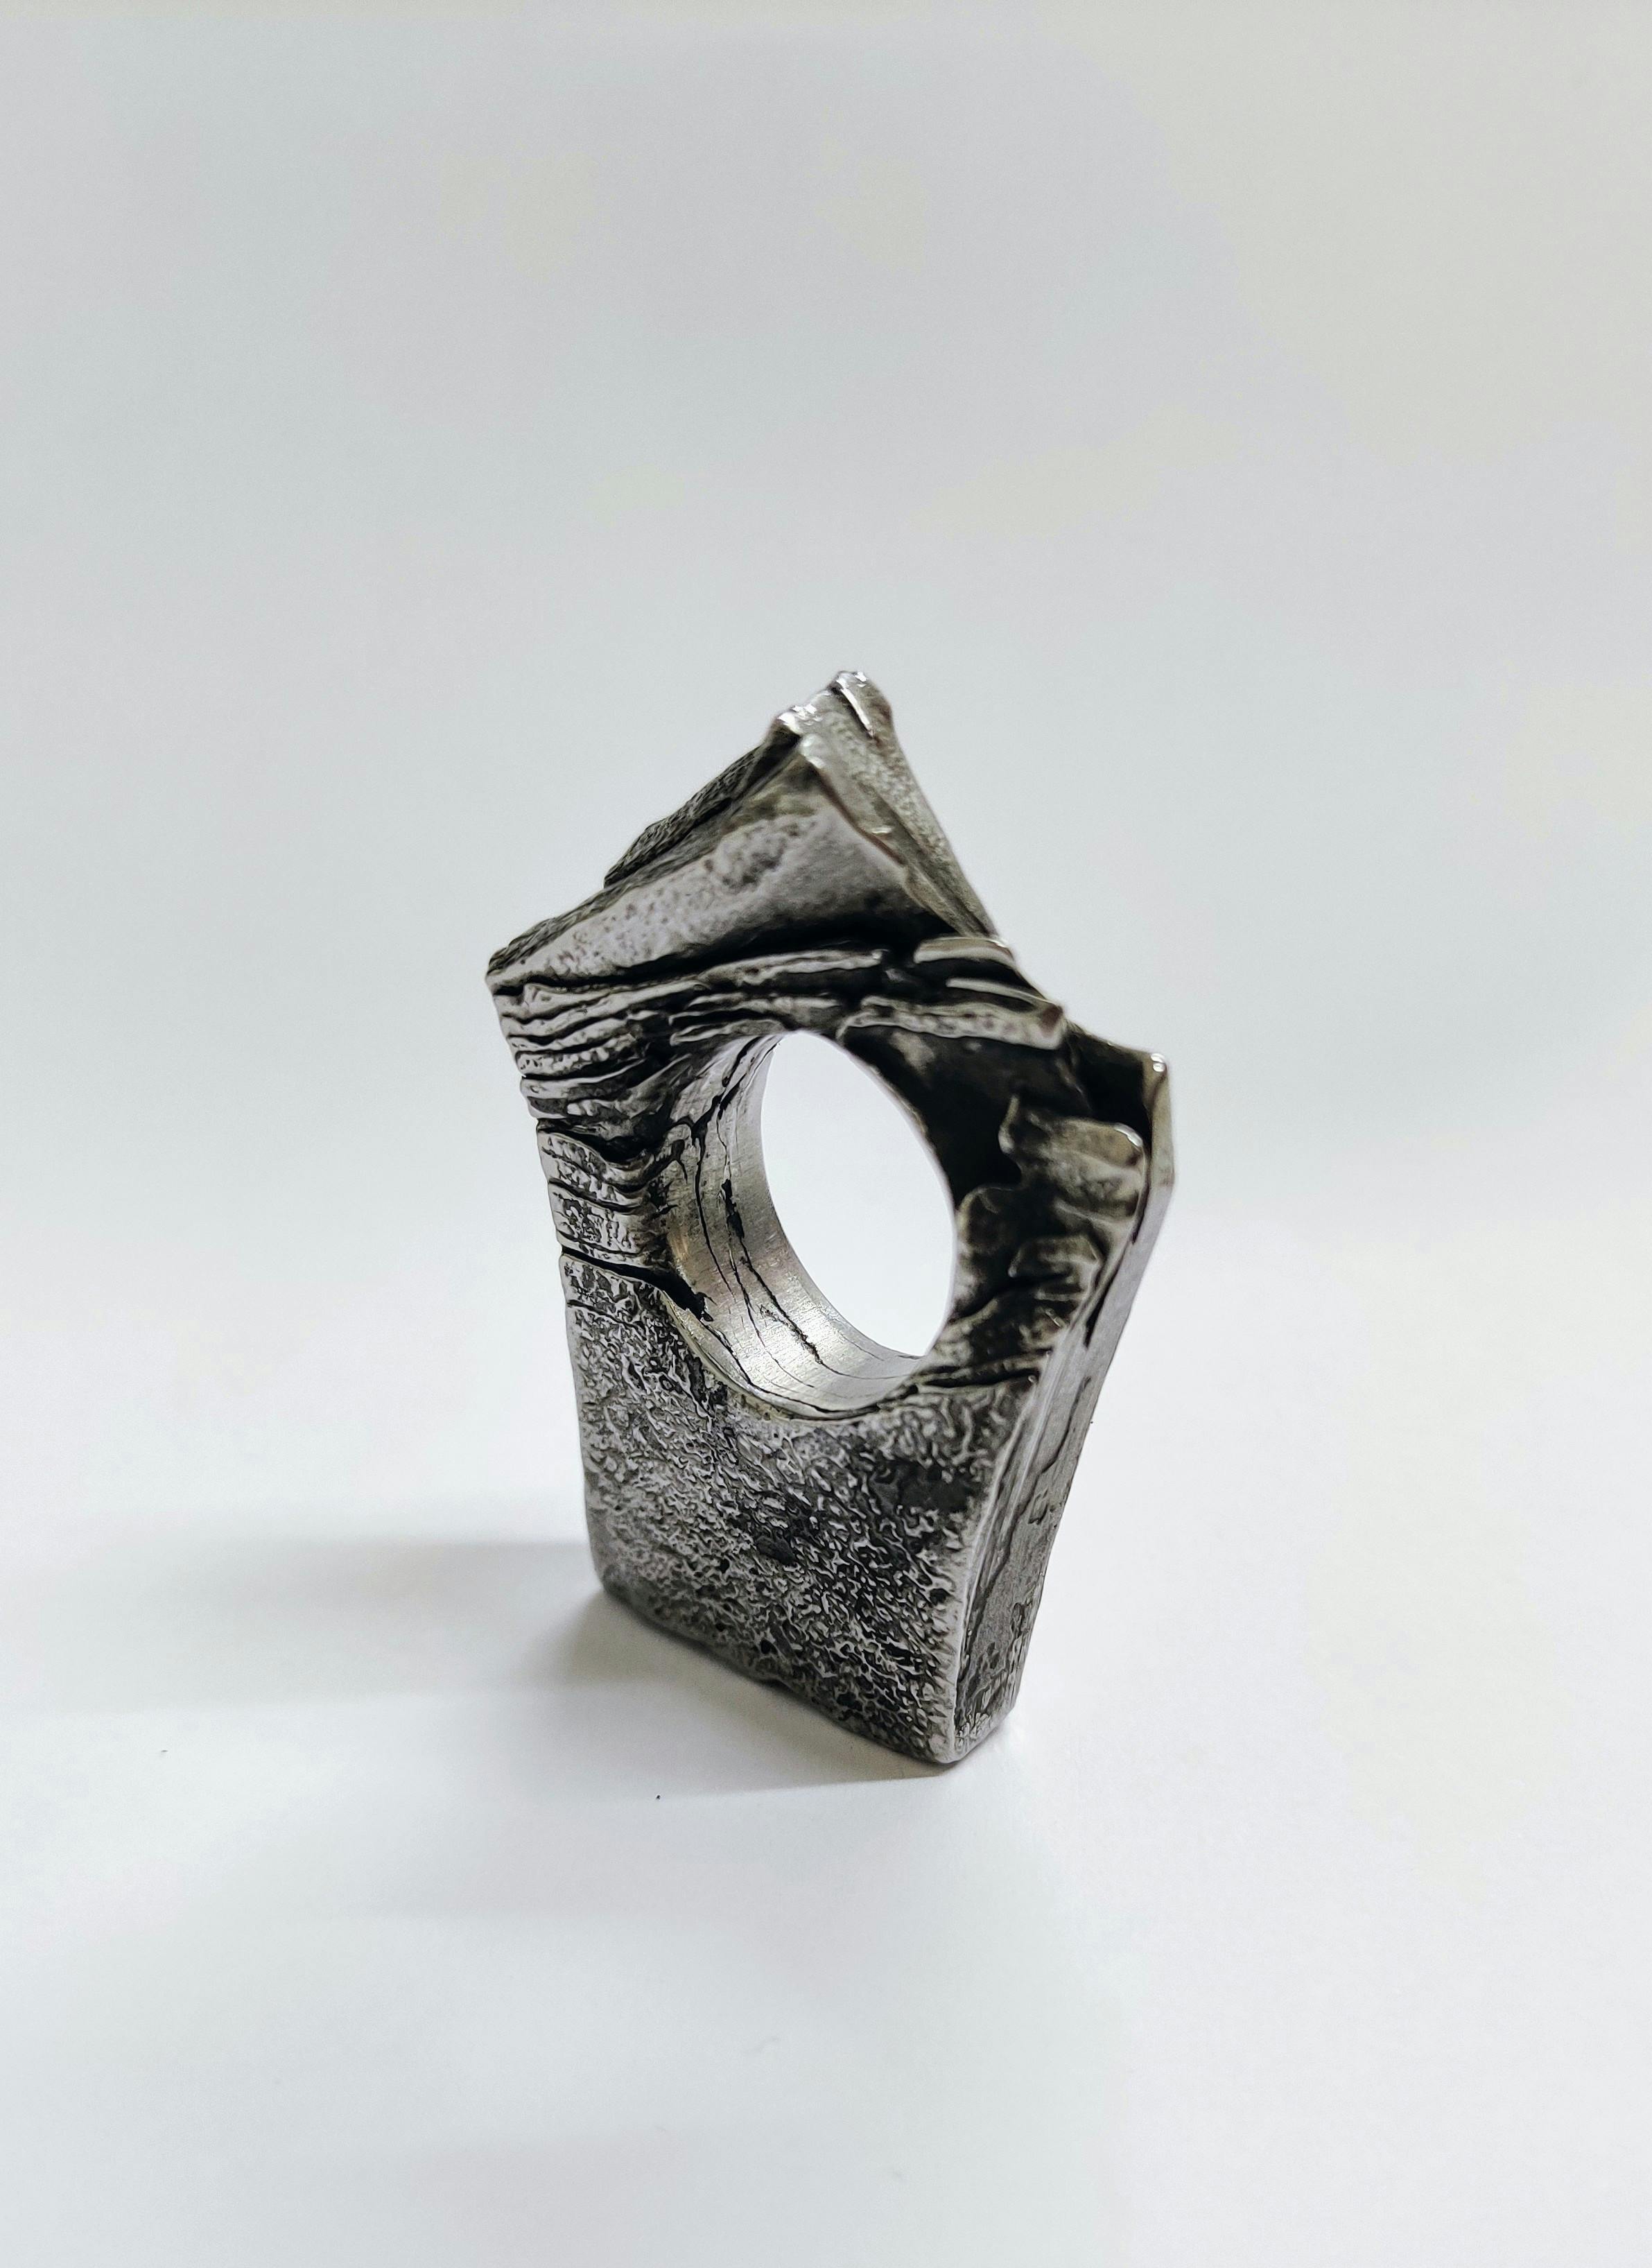 sculptural metal ring in pentagon shape with folded crags and textured surface